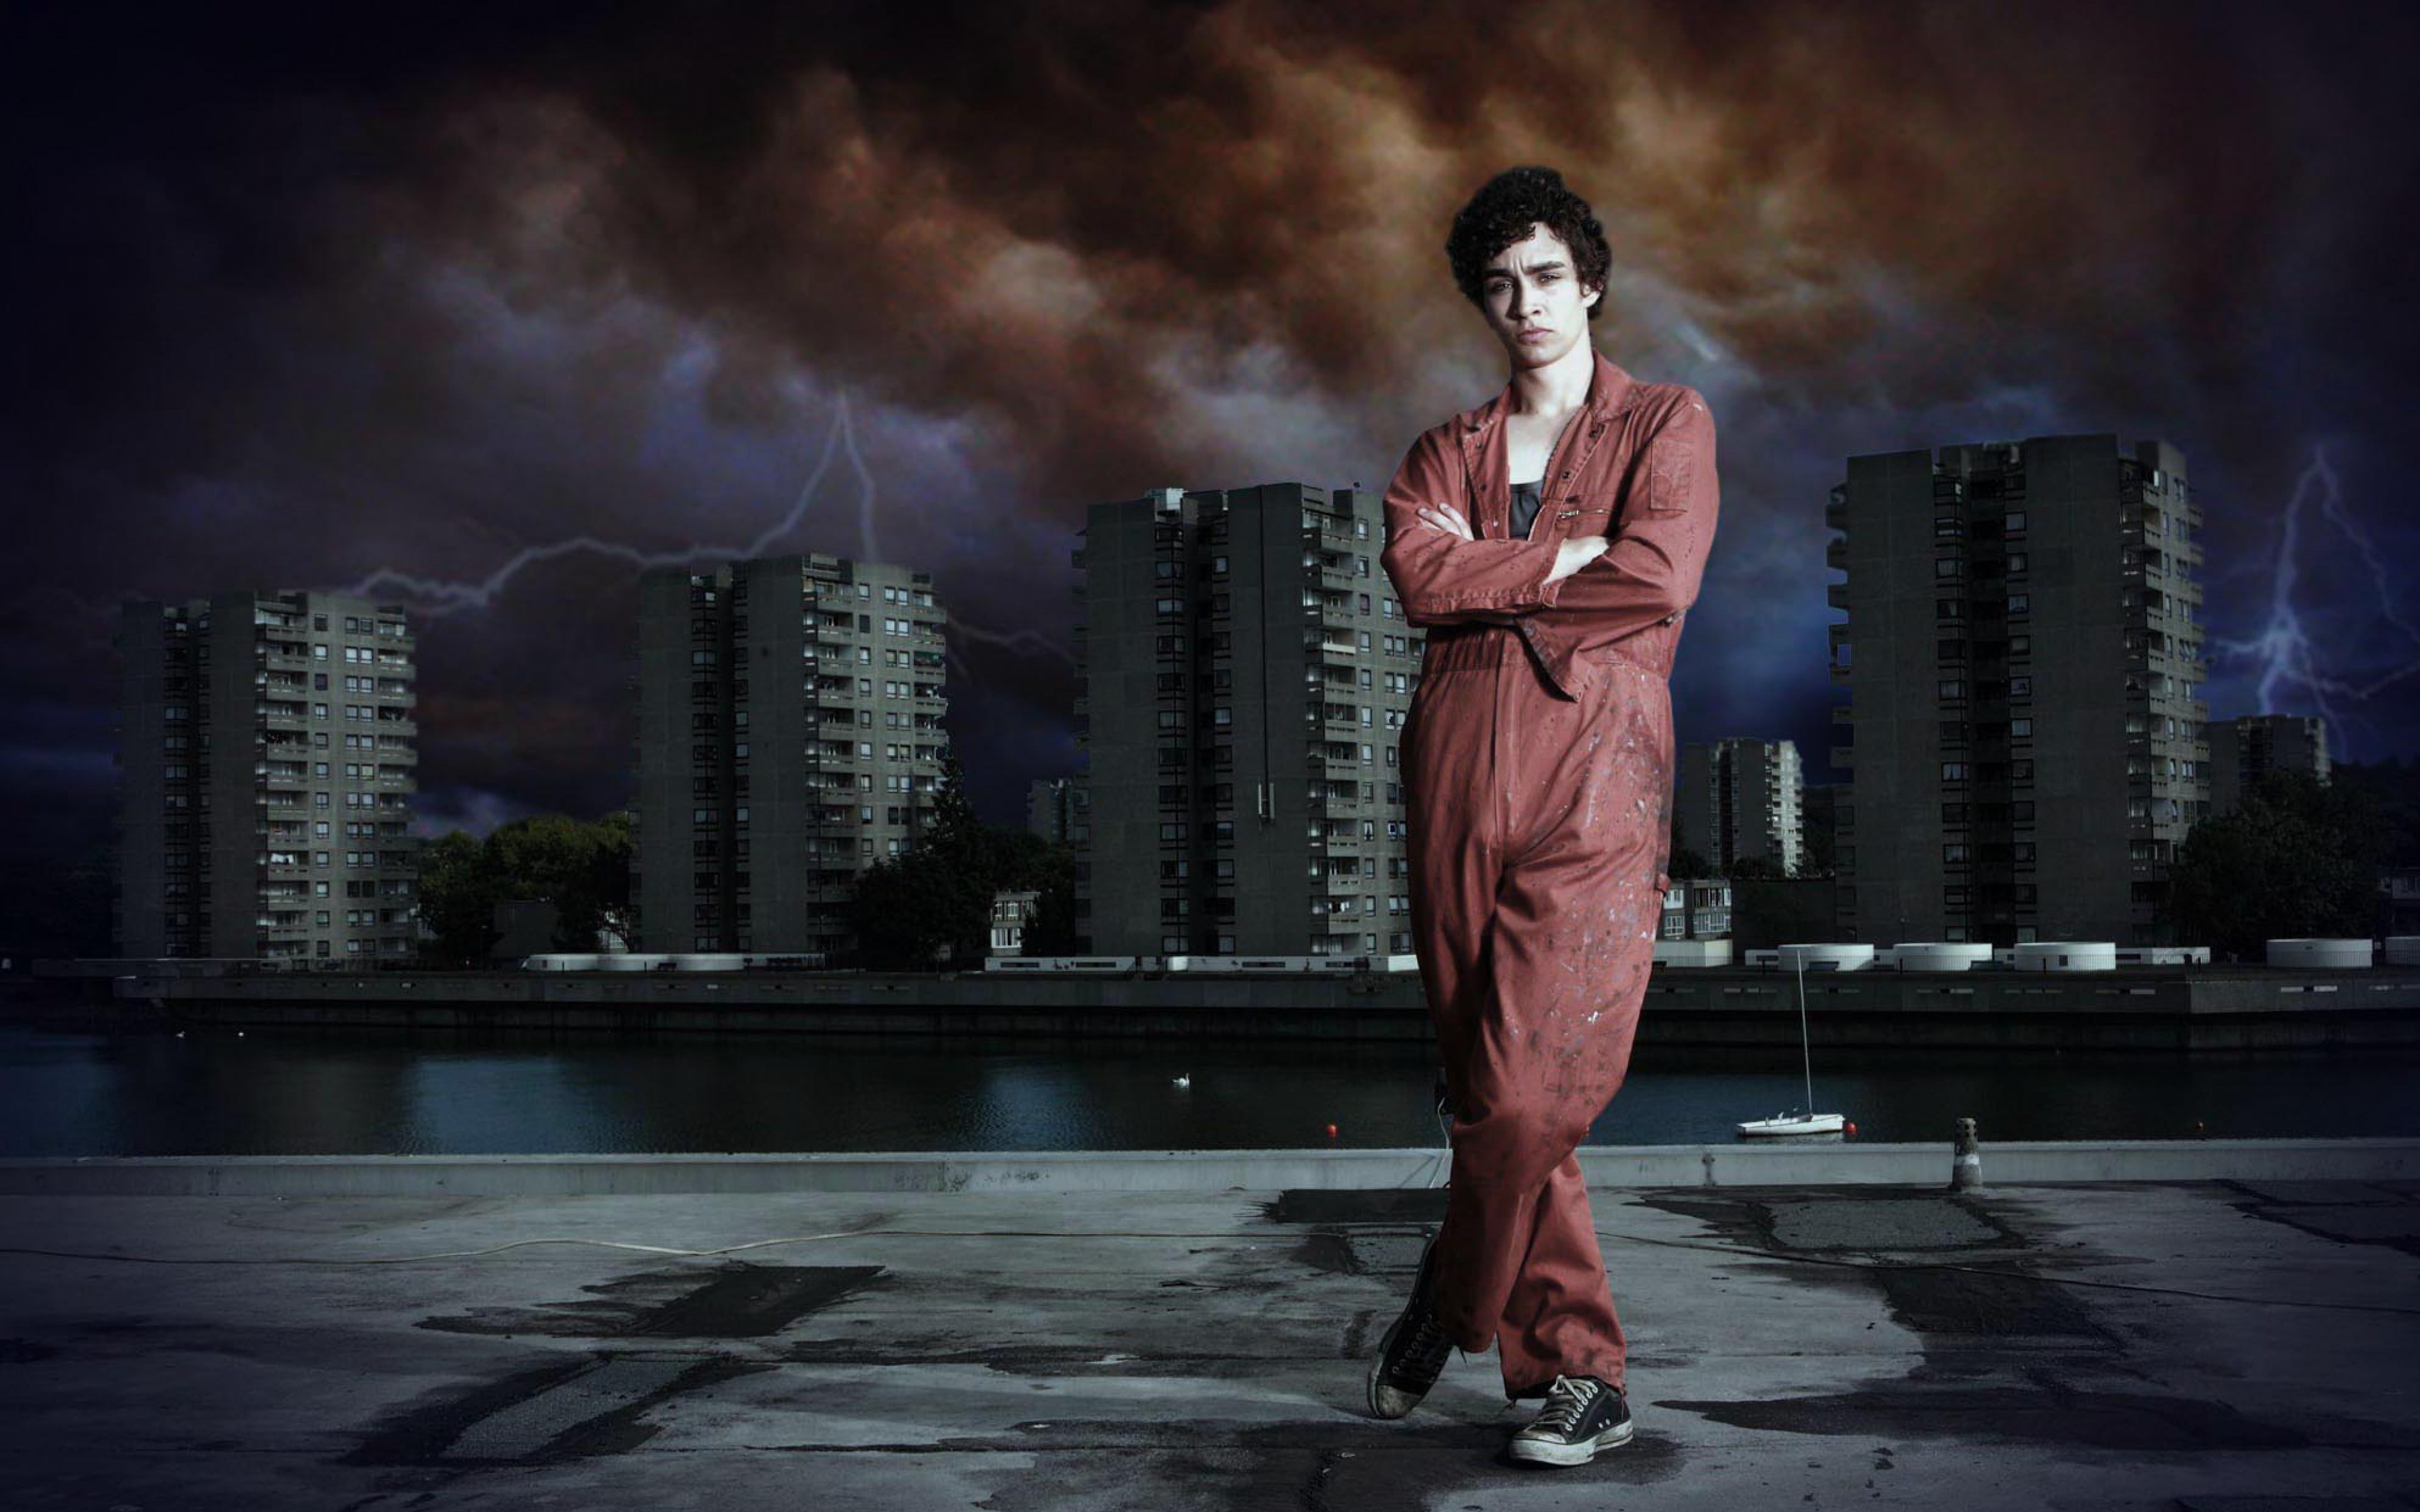 misfits, 2009 backgrounds, robert sheehan, nathan young, download 3840x2400 misfits